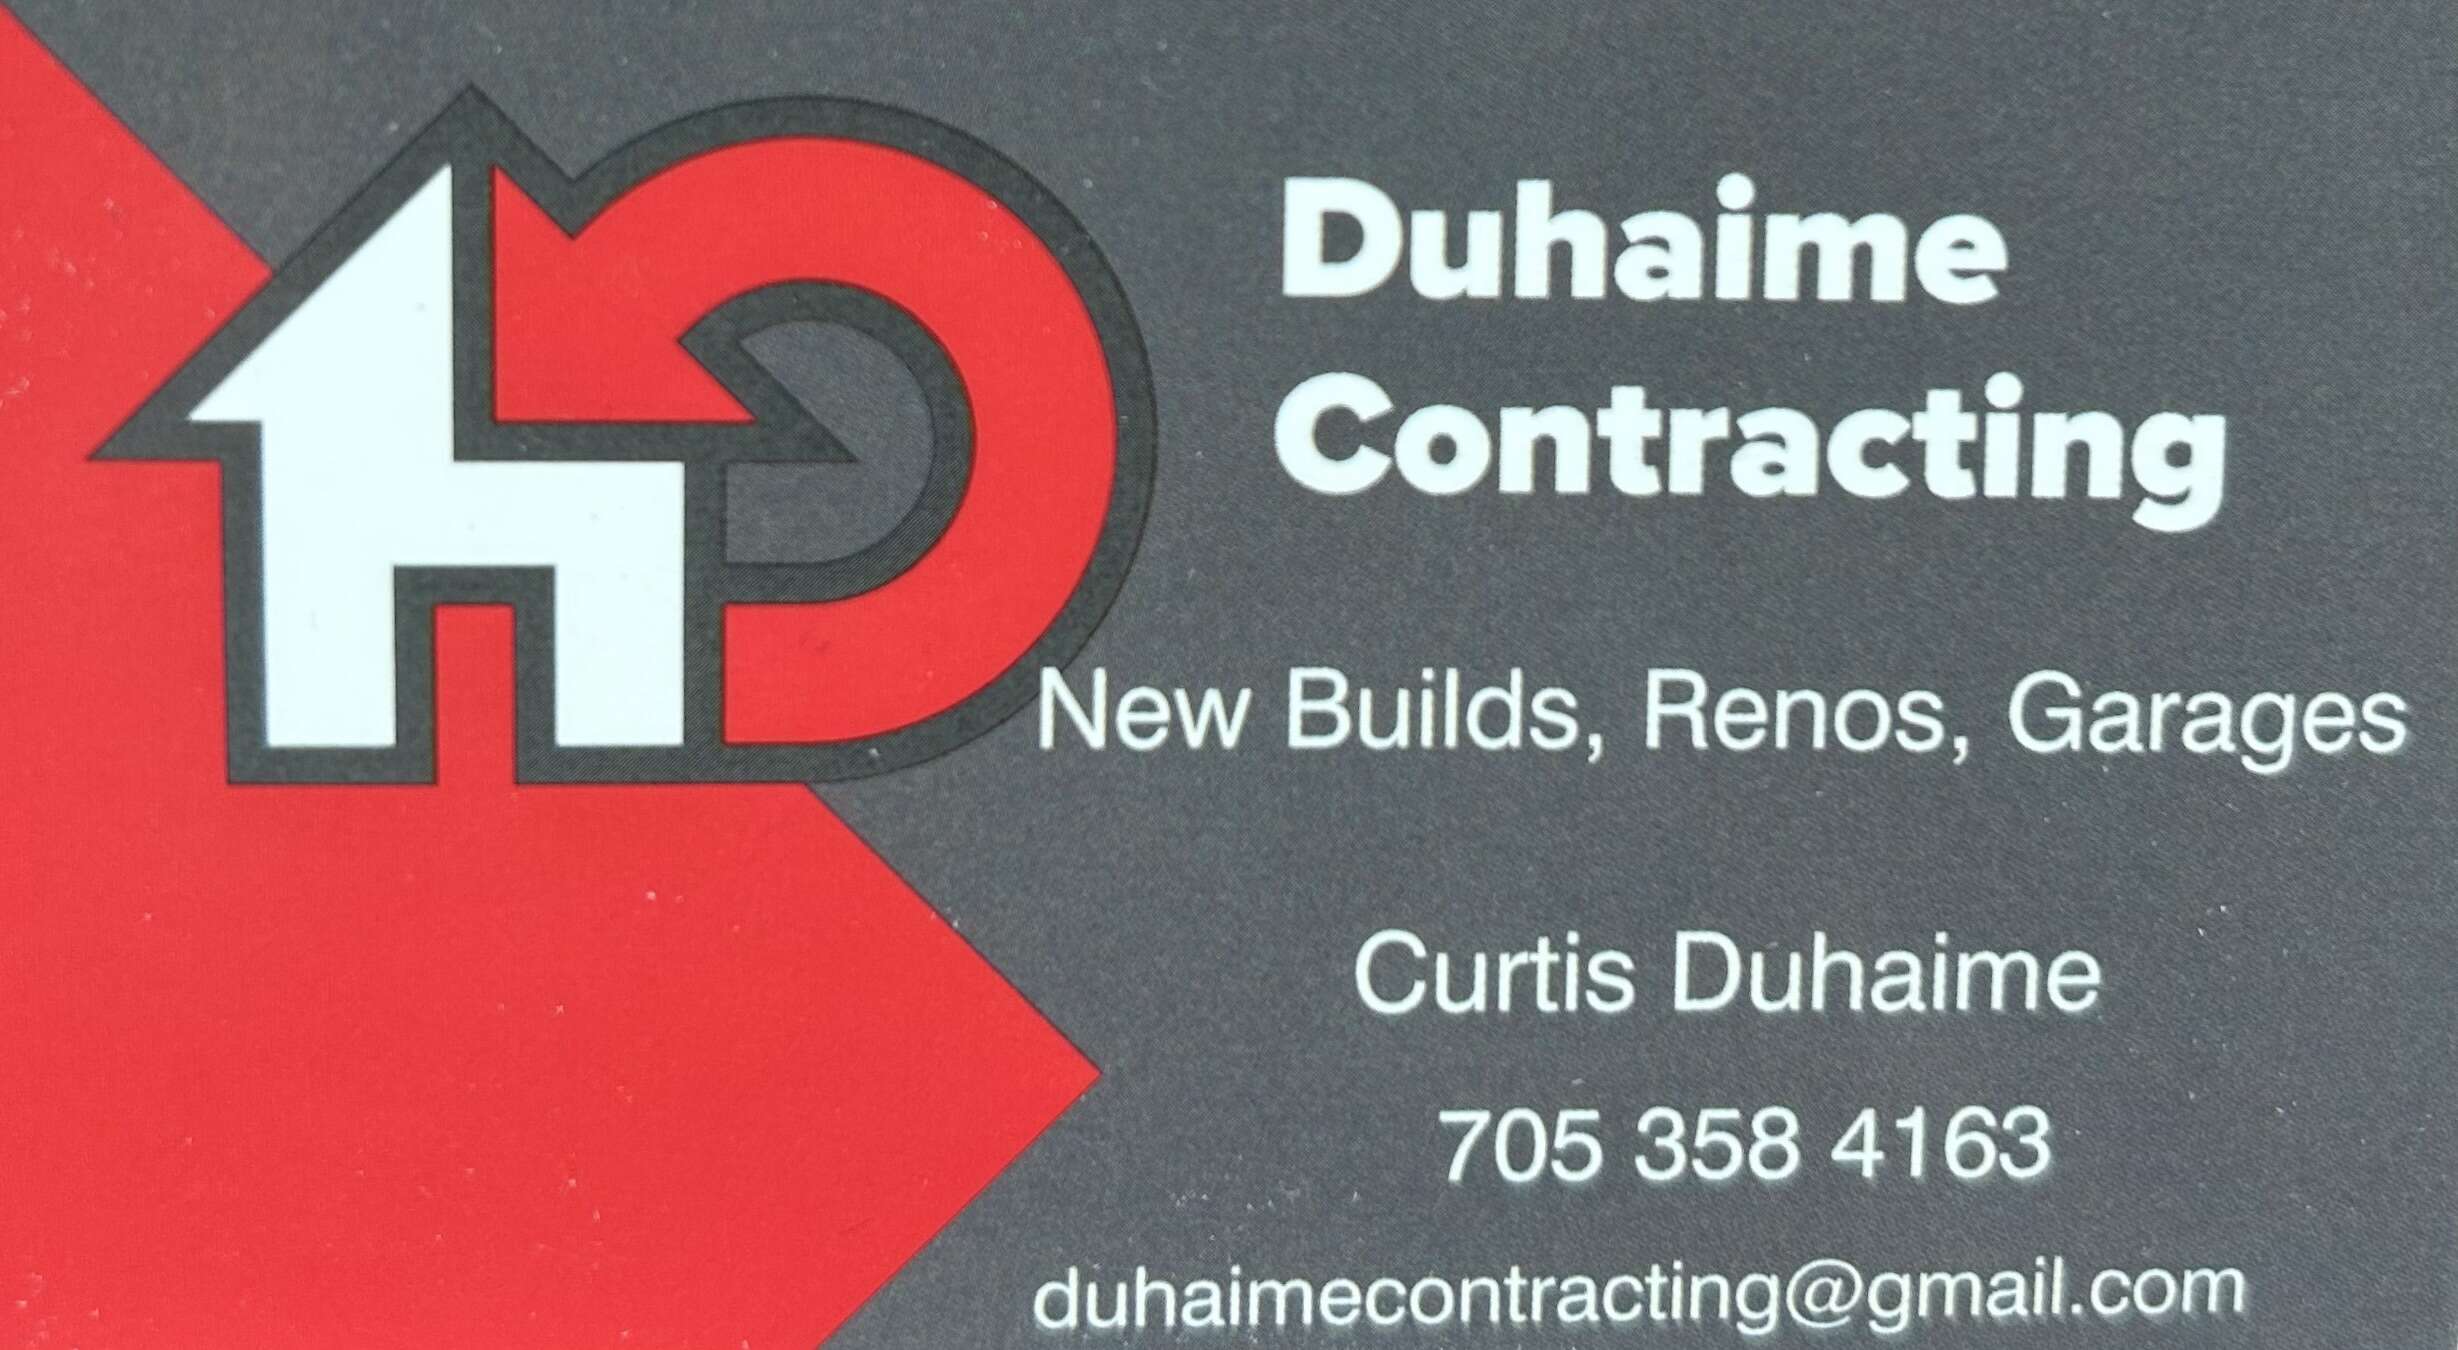 Duhaime Contracting